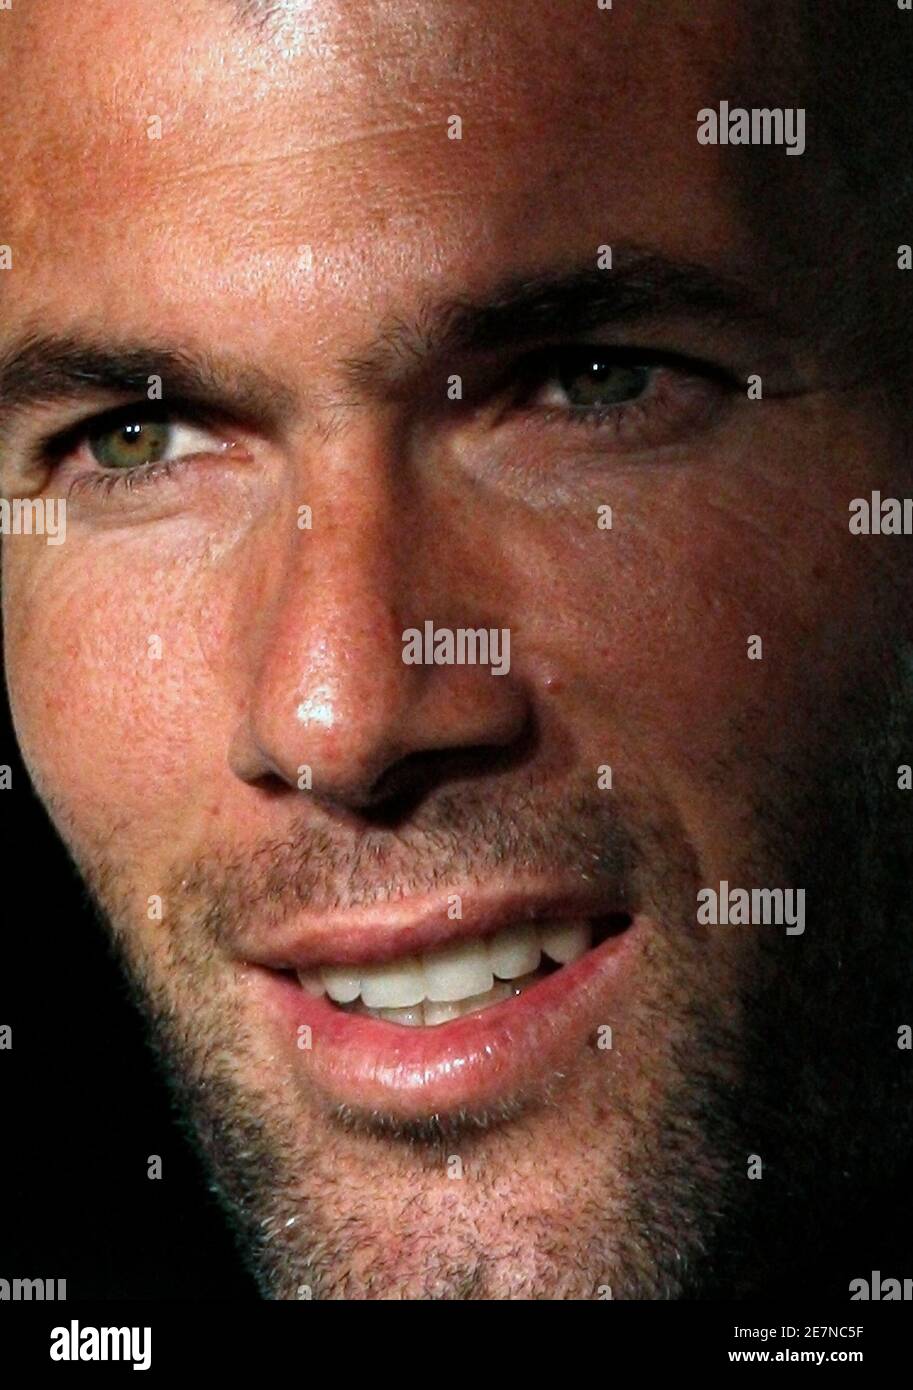 Former French national team soccer player Zinedine Zidane attends a promotional event at a watch shop in Hong Kong October 28,2009    REUTERS/Tyrone Siu     (CHINA SPORT HEADSHOT SOCCER) Stock Photo